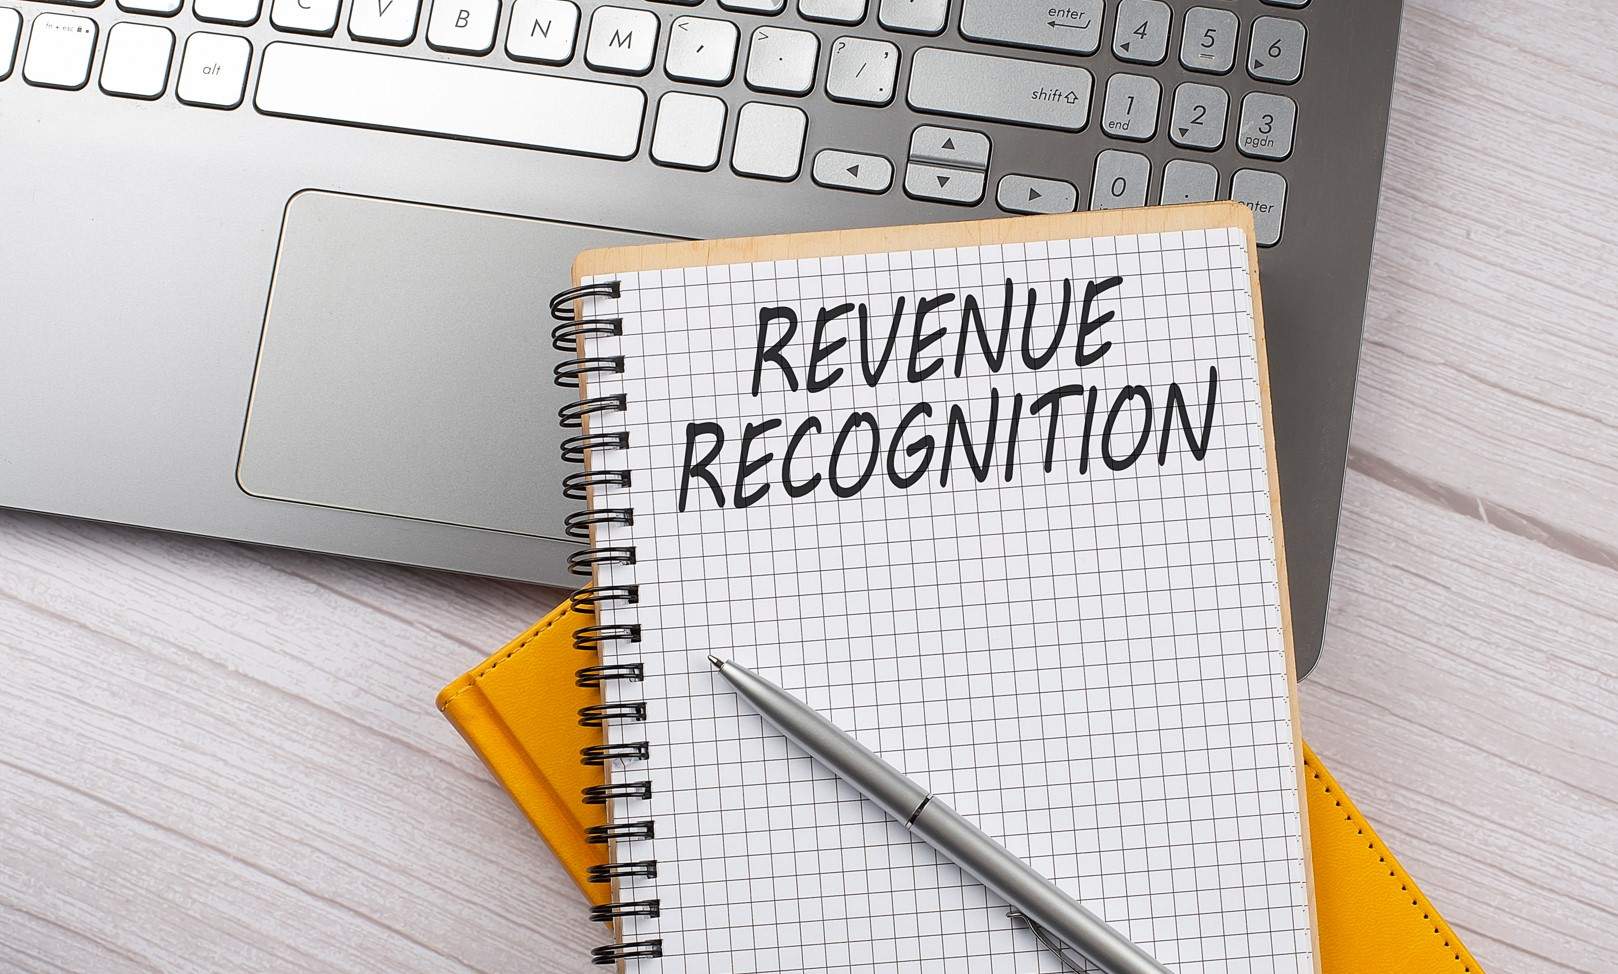 HOW SOFTWARE AND SUBSCRIPTION-BASED BUSINESSES MANAGE COMPLEX REVENUE RECOGNITION?